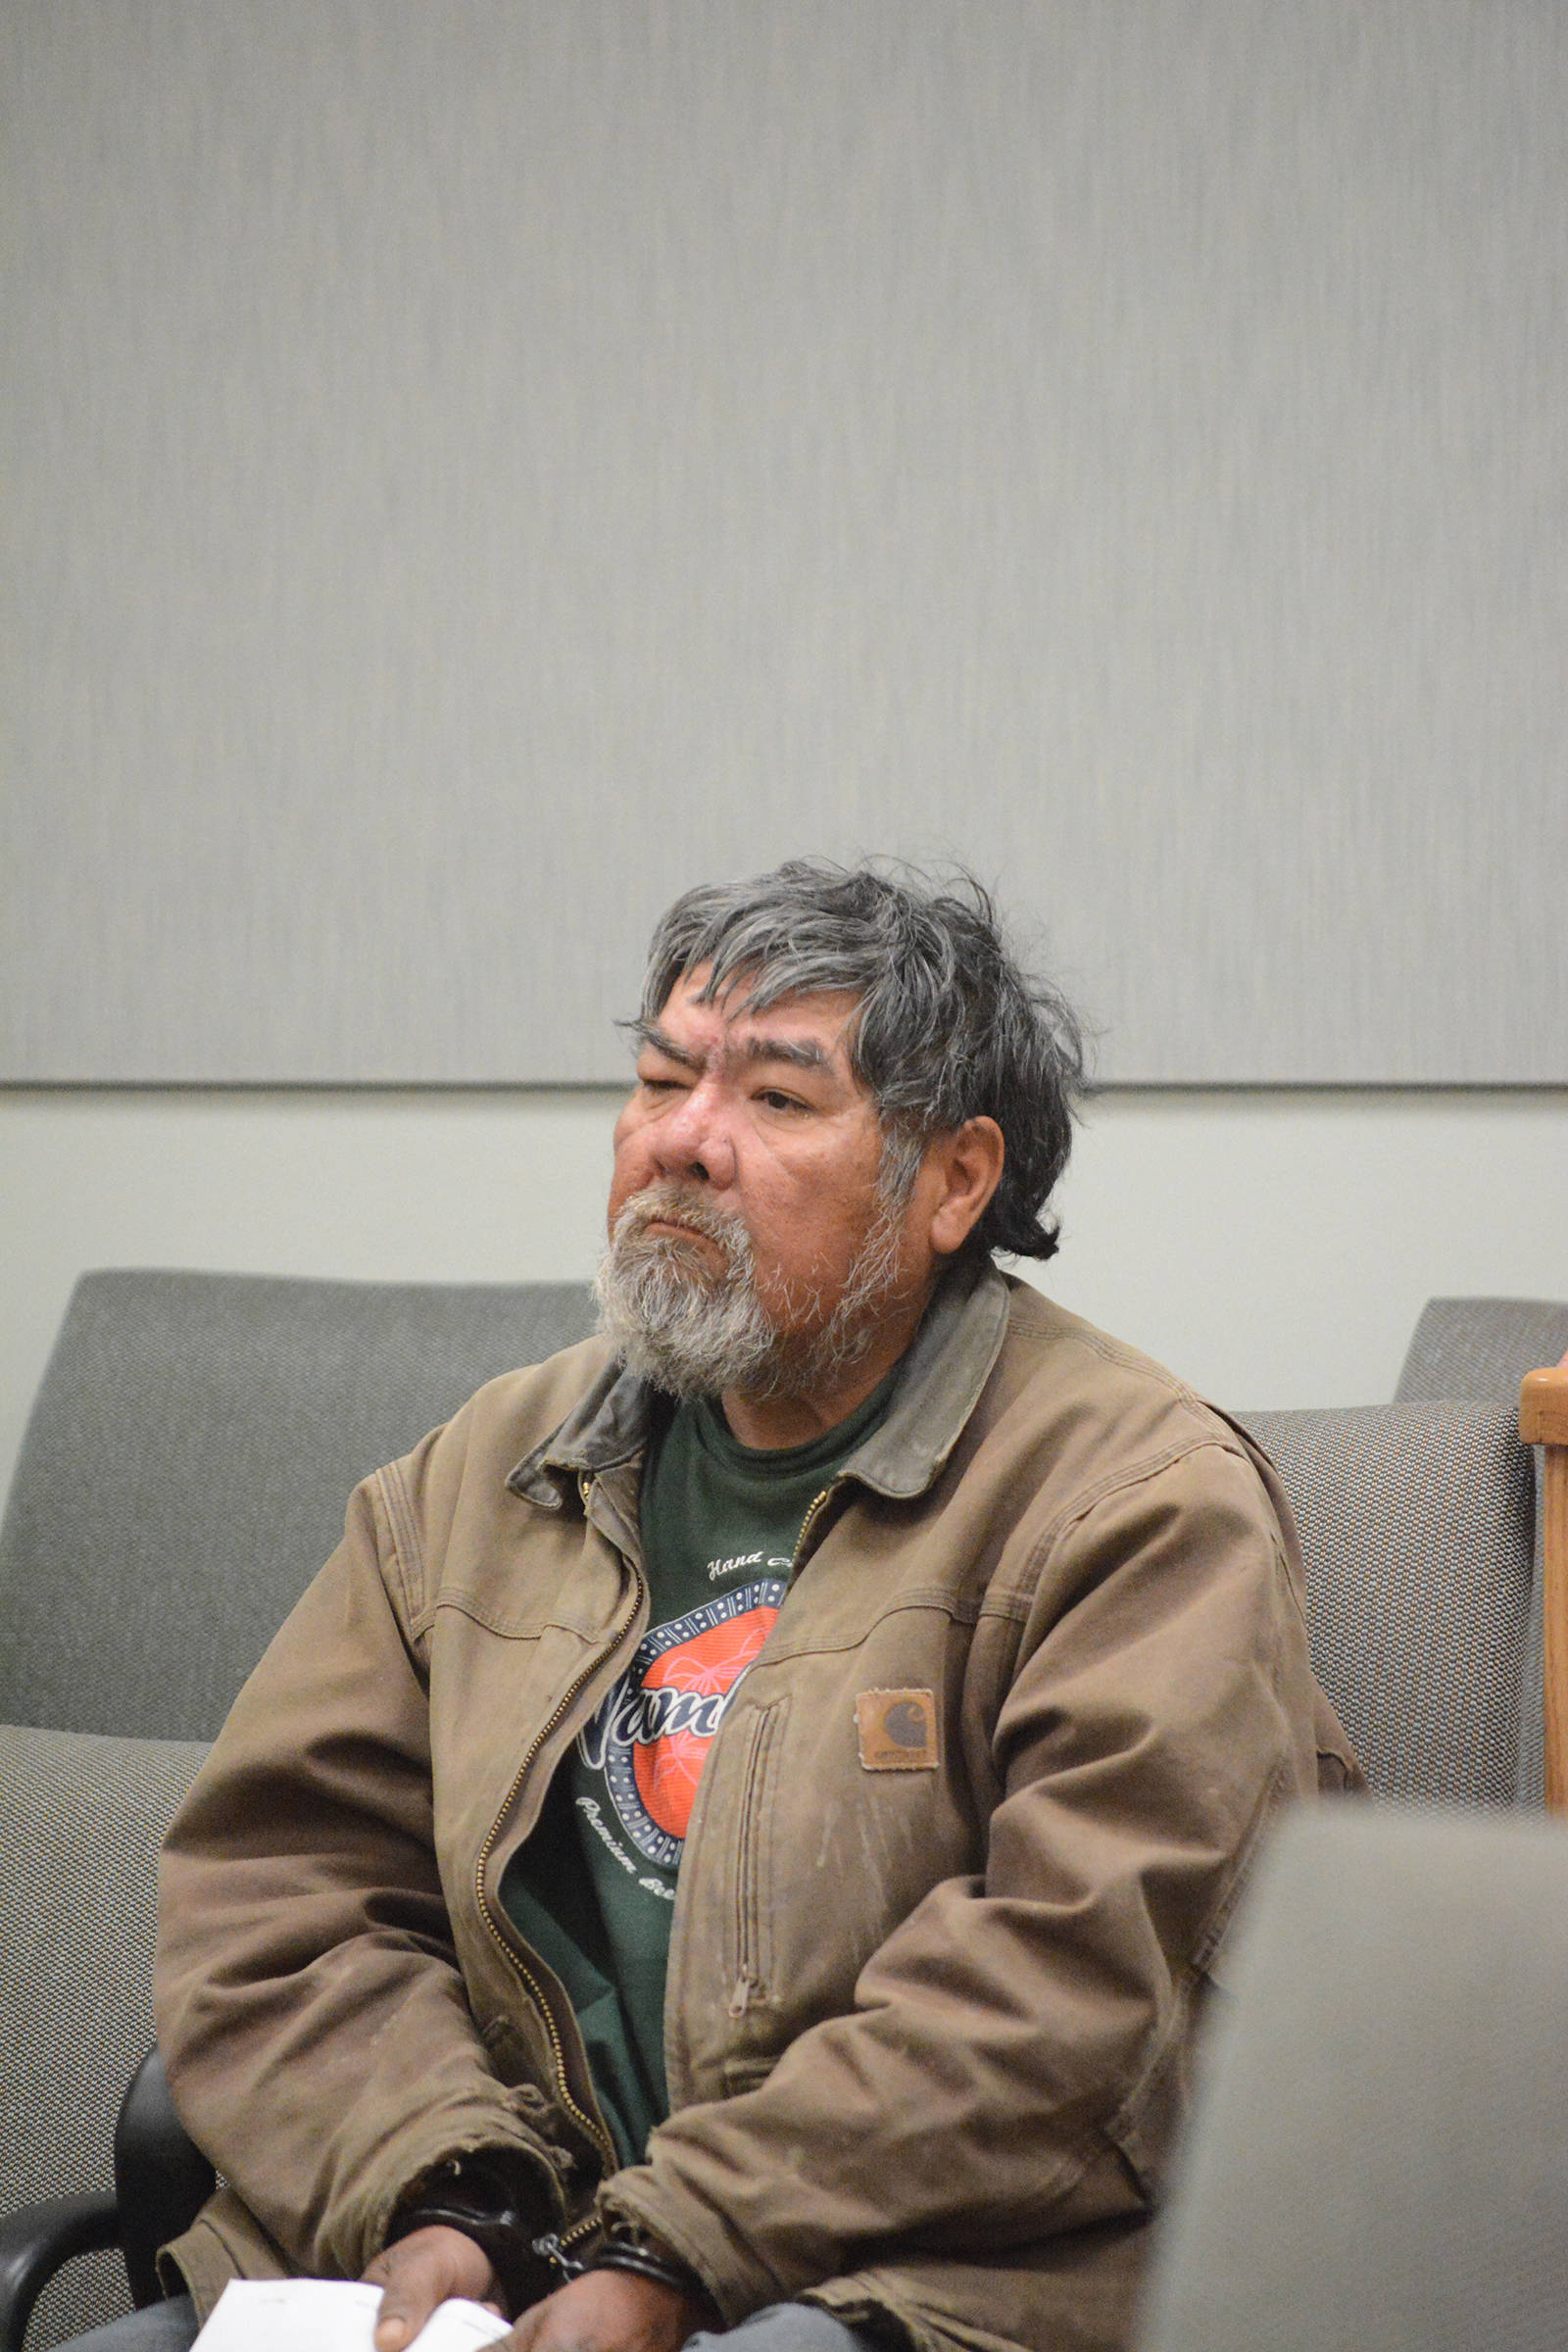 Lee John Henry attends his arraignment on first-degree murder in the Homer Courtroom on Oct. 17, 2016, in Homer, Alaska. Homer Police arrested Henry in the death of Mark Matthews, then 61, killed off the Poopdeck Trail on July 28, 2013. (Photo by Michael Armstrong/Homer News)